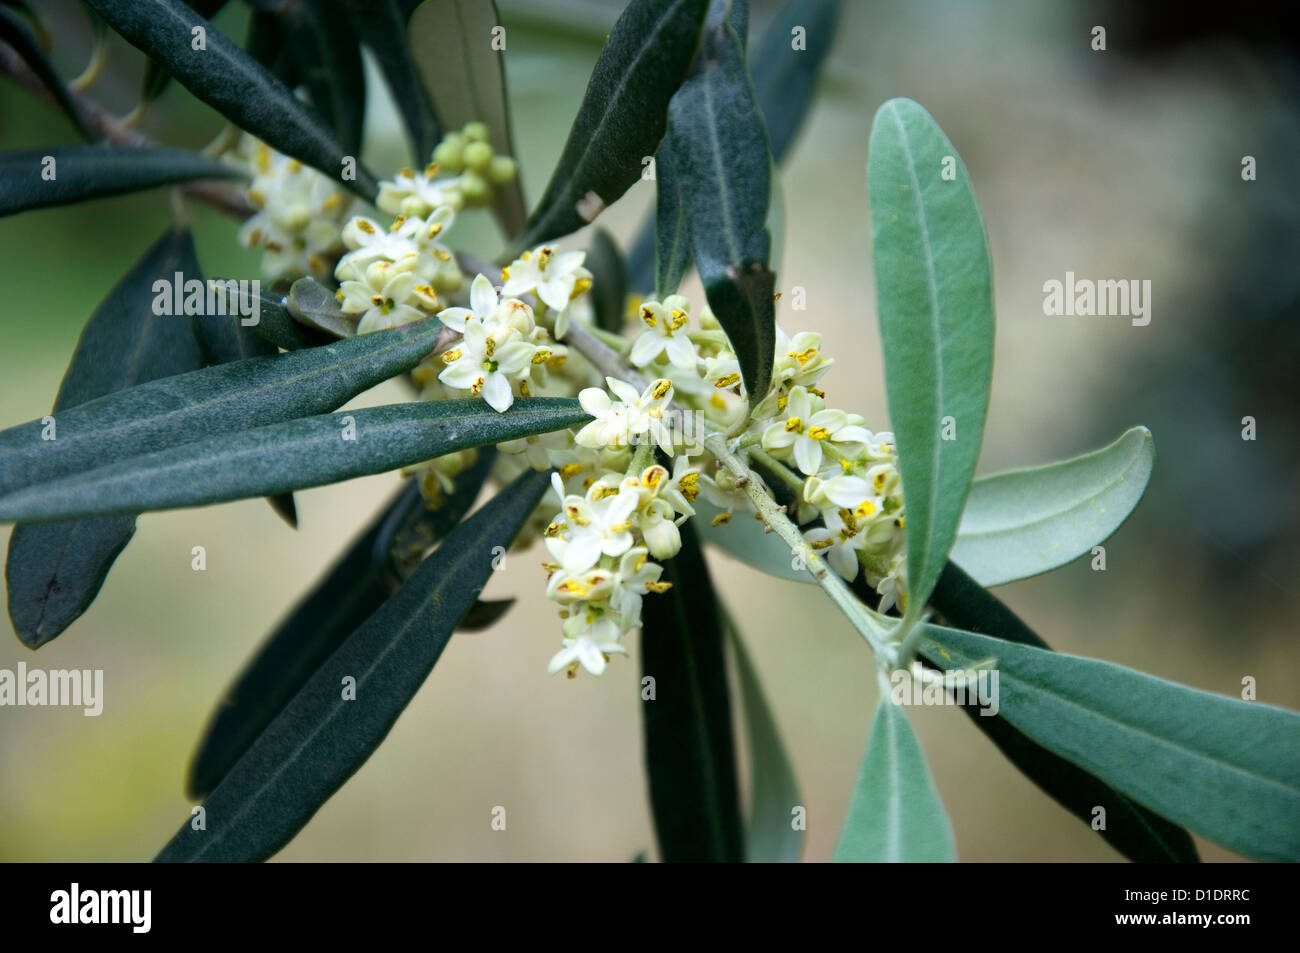 Blossoming branch of an olive tree (Olea europaea) Stock Photo